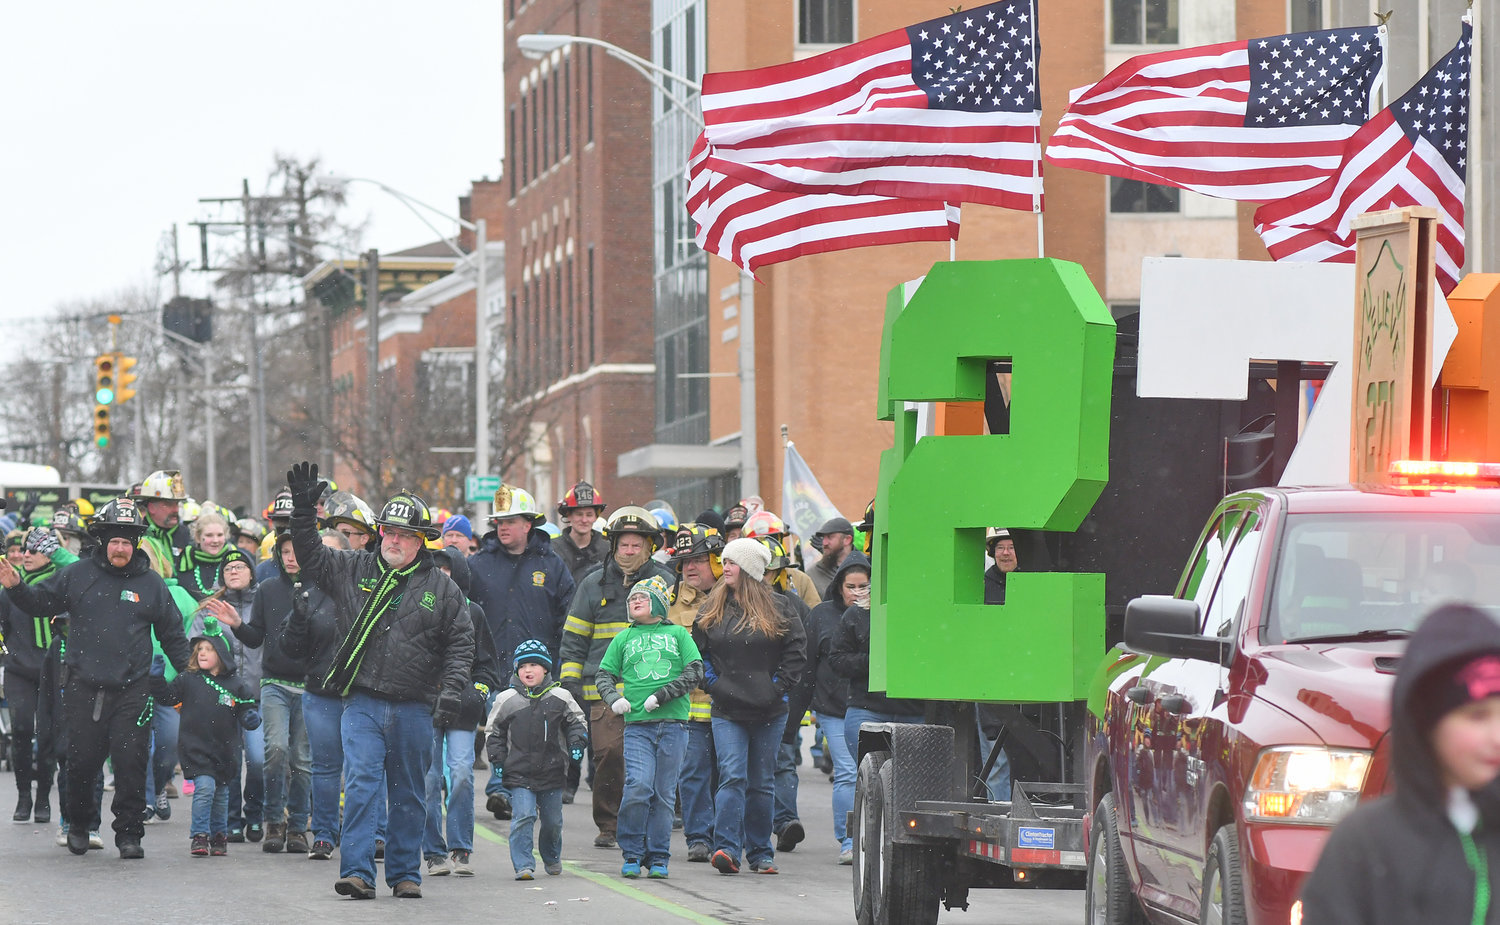 Utica's St. Patrick's Day parade Sunday, March 17, 2019 Daily Sentinel